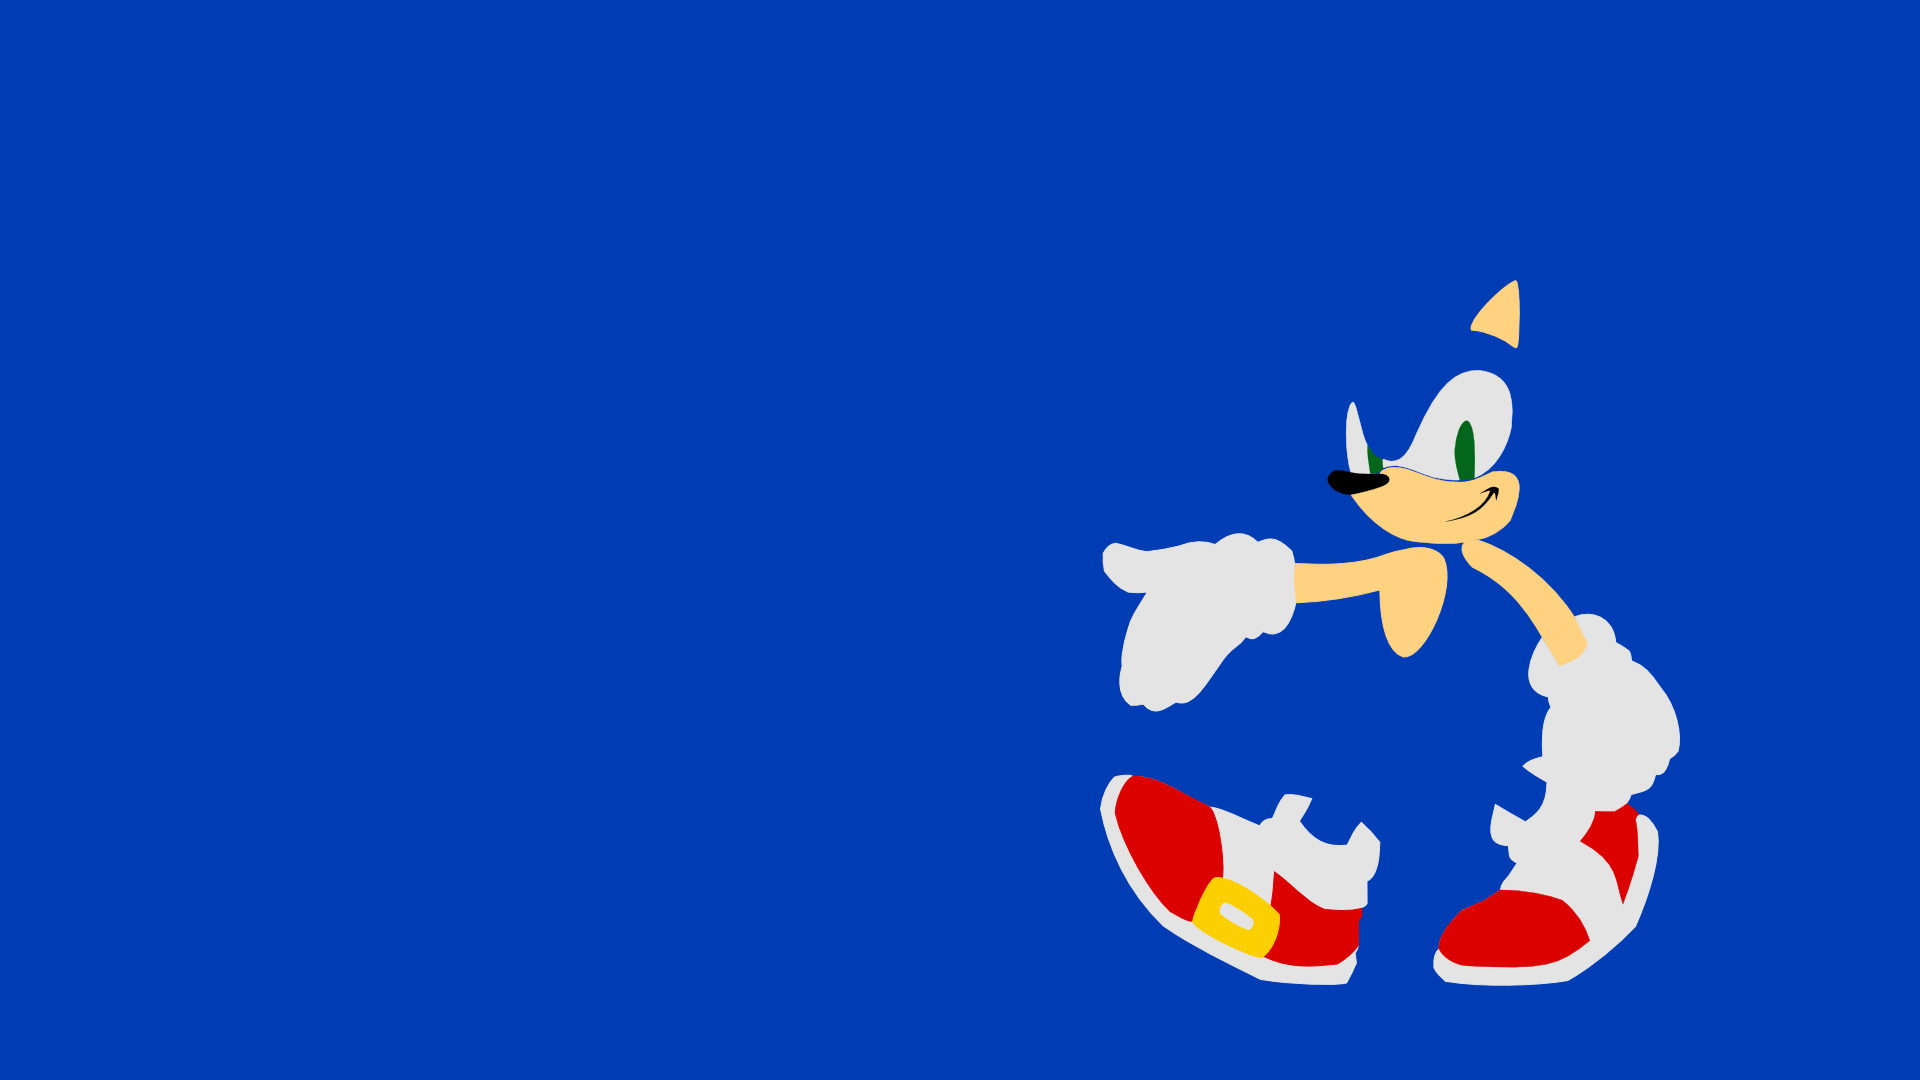 Sonic the Hedgehog Twitter Background